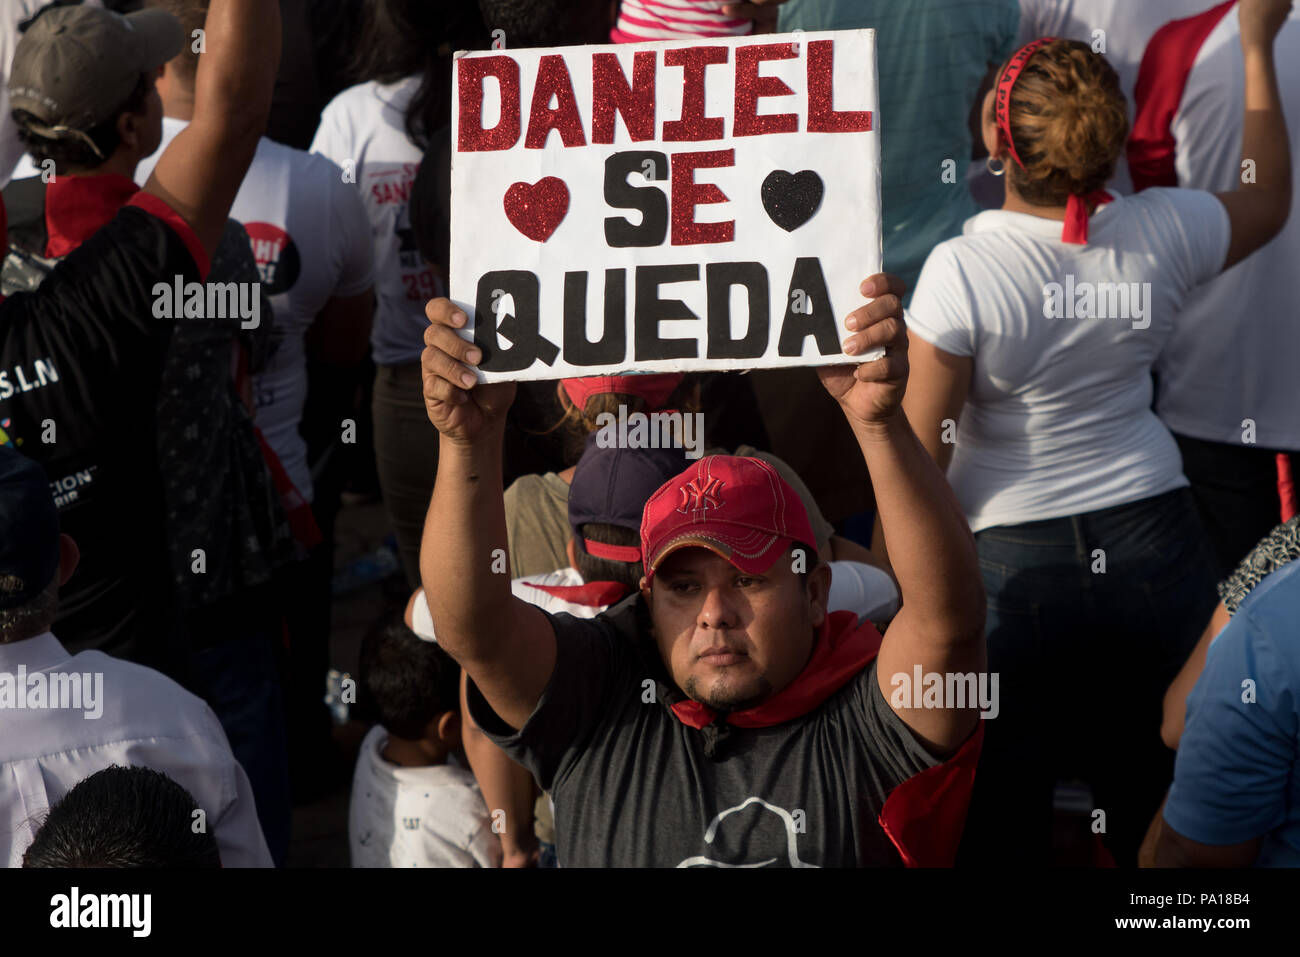 Managua, Nicaragua. 19th July, 2018. A supporter of the Sandinista National Liberation Front (FSLN) holding a sign with the text 'Daniel stays' during an event in conmemoration of the 39th anniversary of the Sandinista revolution. The Nicaraguan president has accused the country's Catholic church of being part of an attempted coup against his government. According to Ortega, the country's Catholic bishops aren't intermediaries in the political crisis, but rather part of a putschist conspiracy. Credit: Carlos Herrera/dpa/Alamy Live News Stock Photo